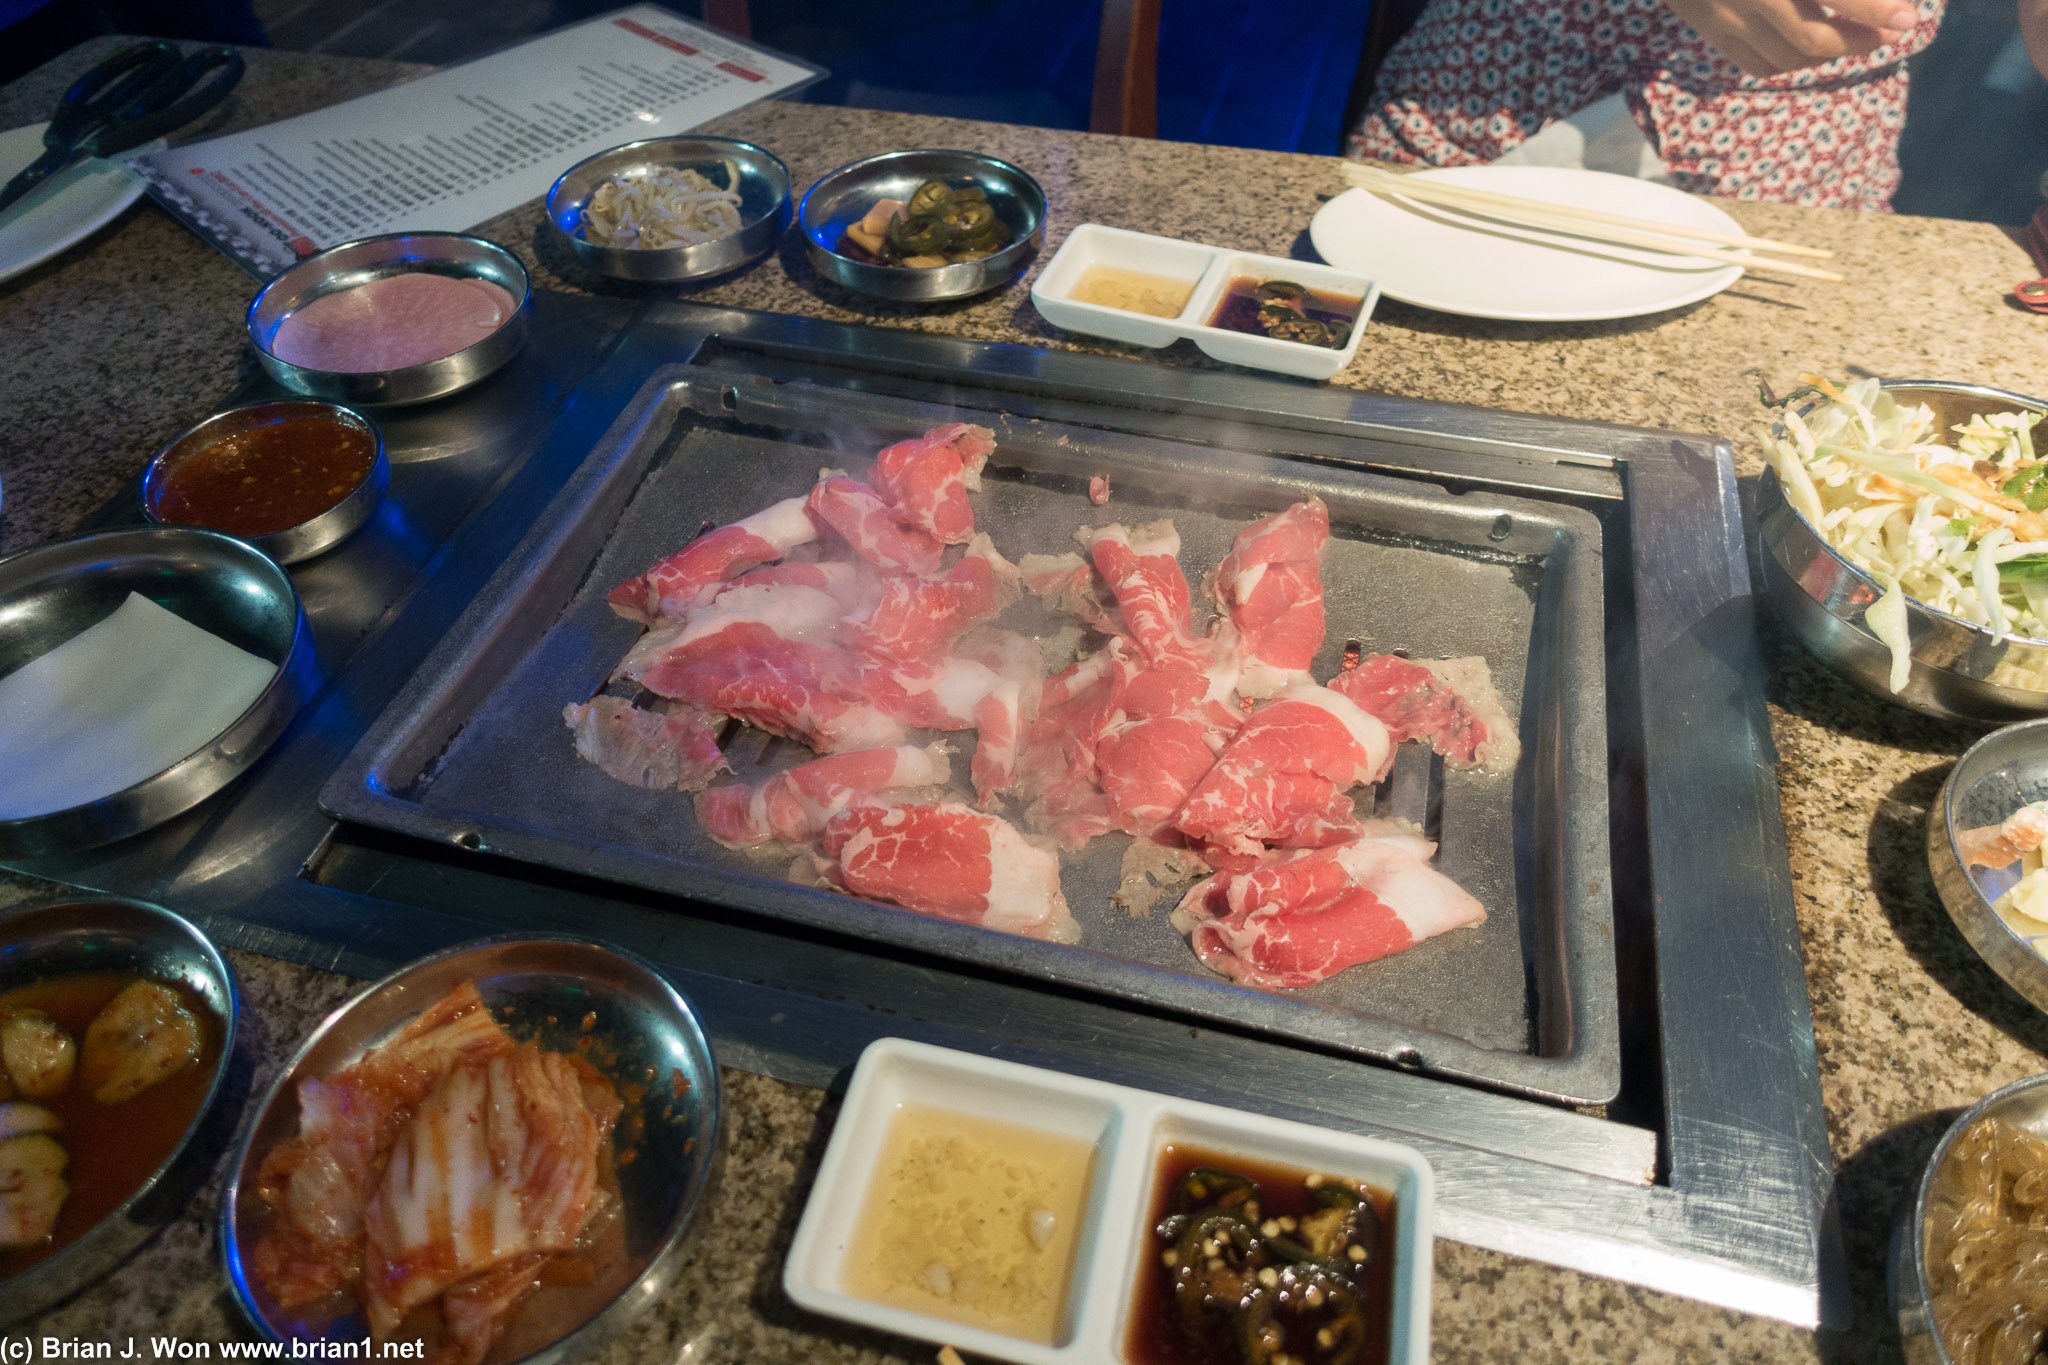 Time for kbbq!